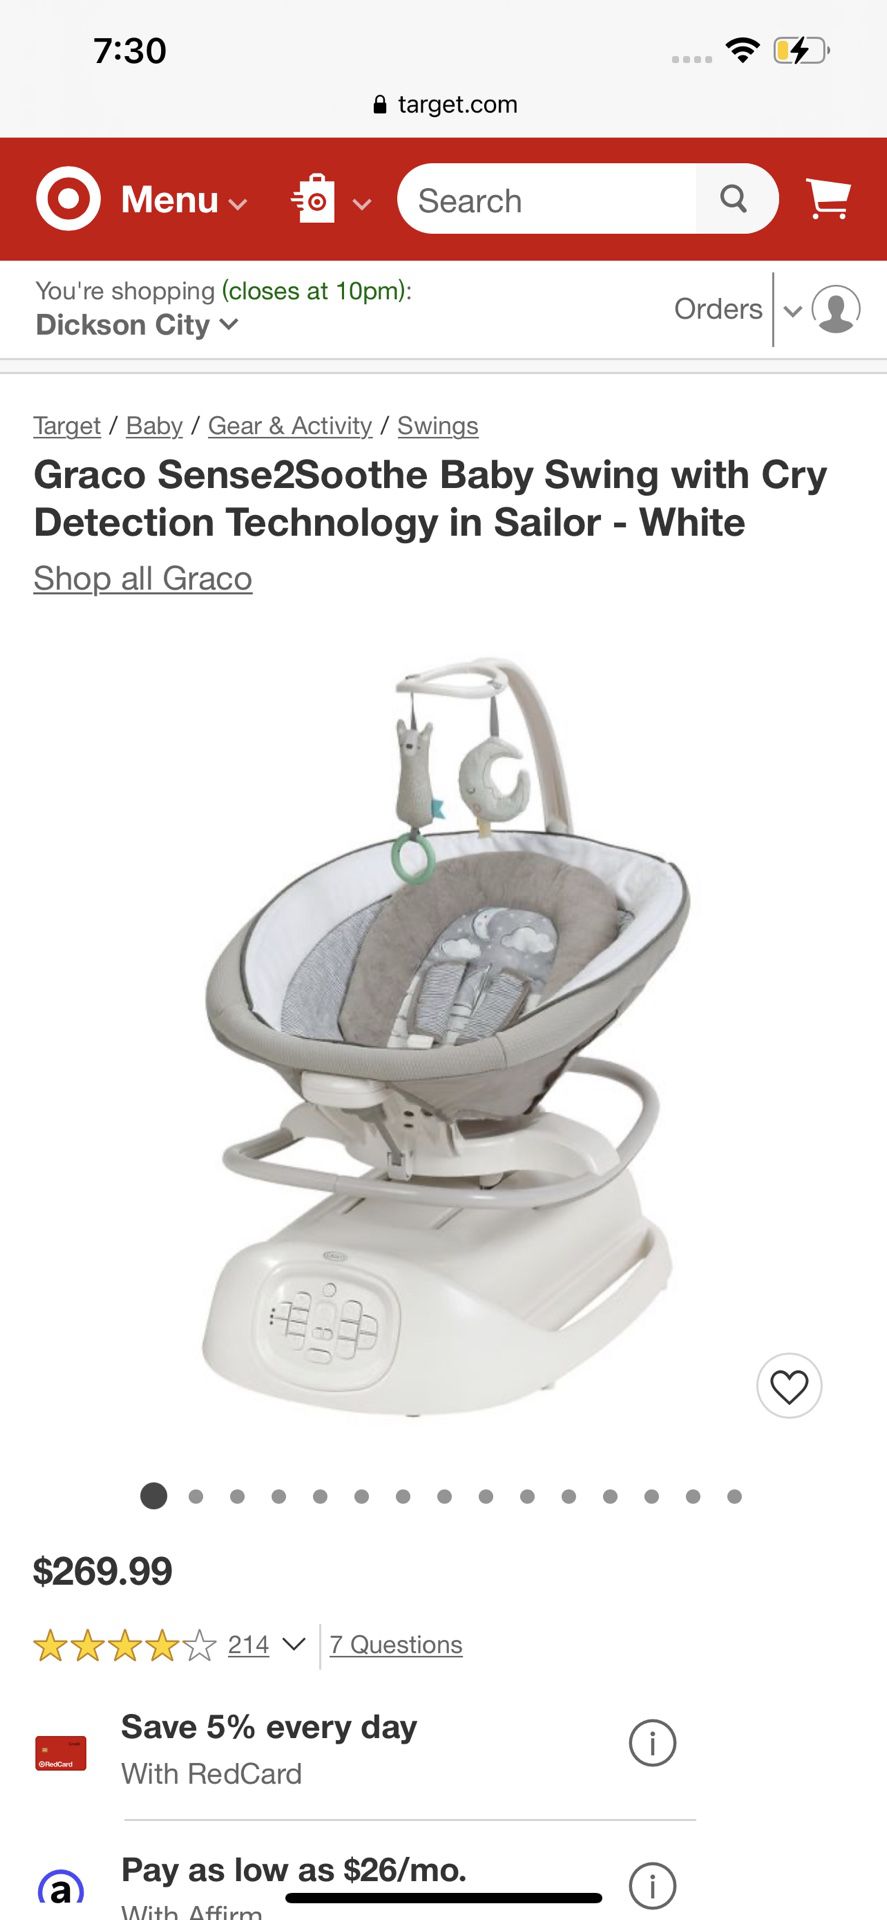 Graco Sense2Soothe Baby Swing with Cry Detection Technology in Sailor - White